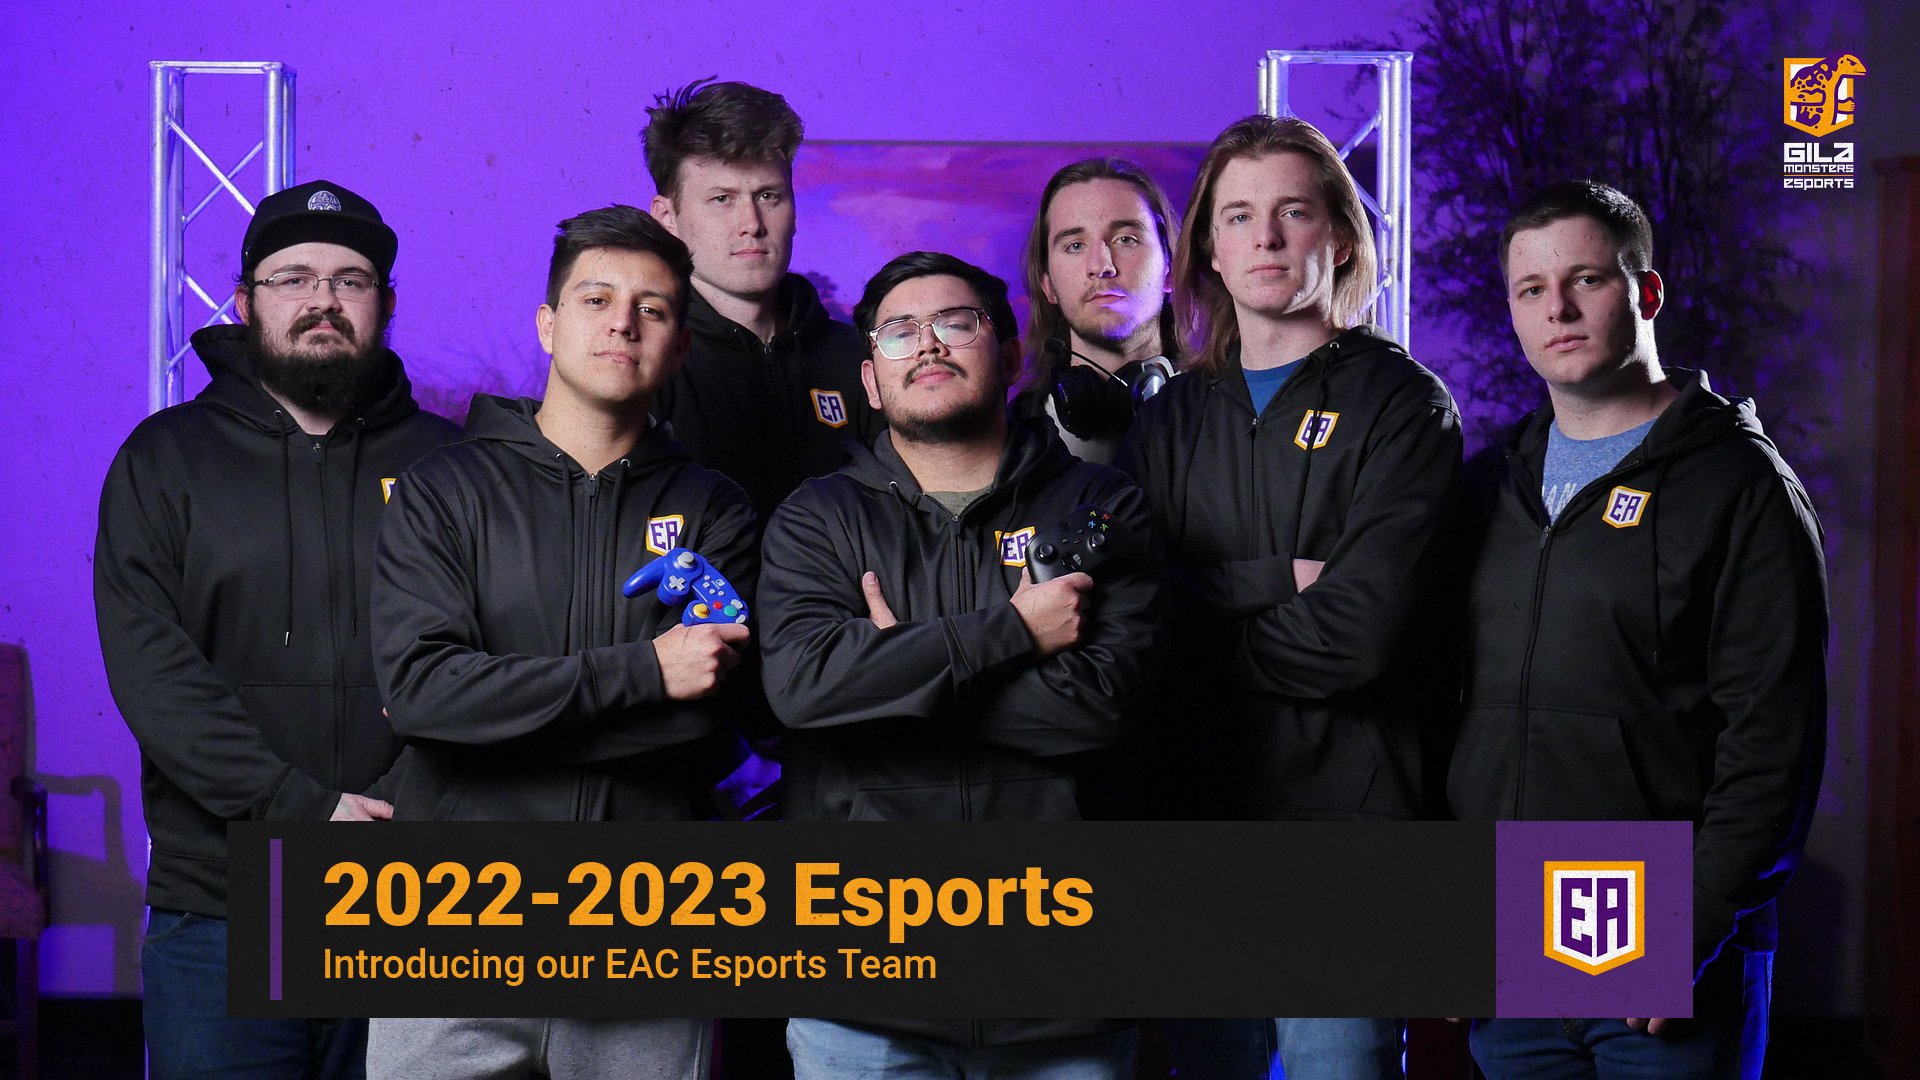 Welcoming our 22-23 Esports Team